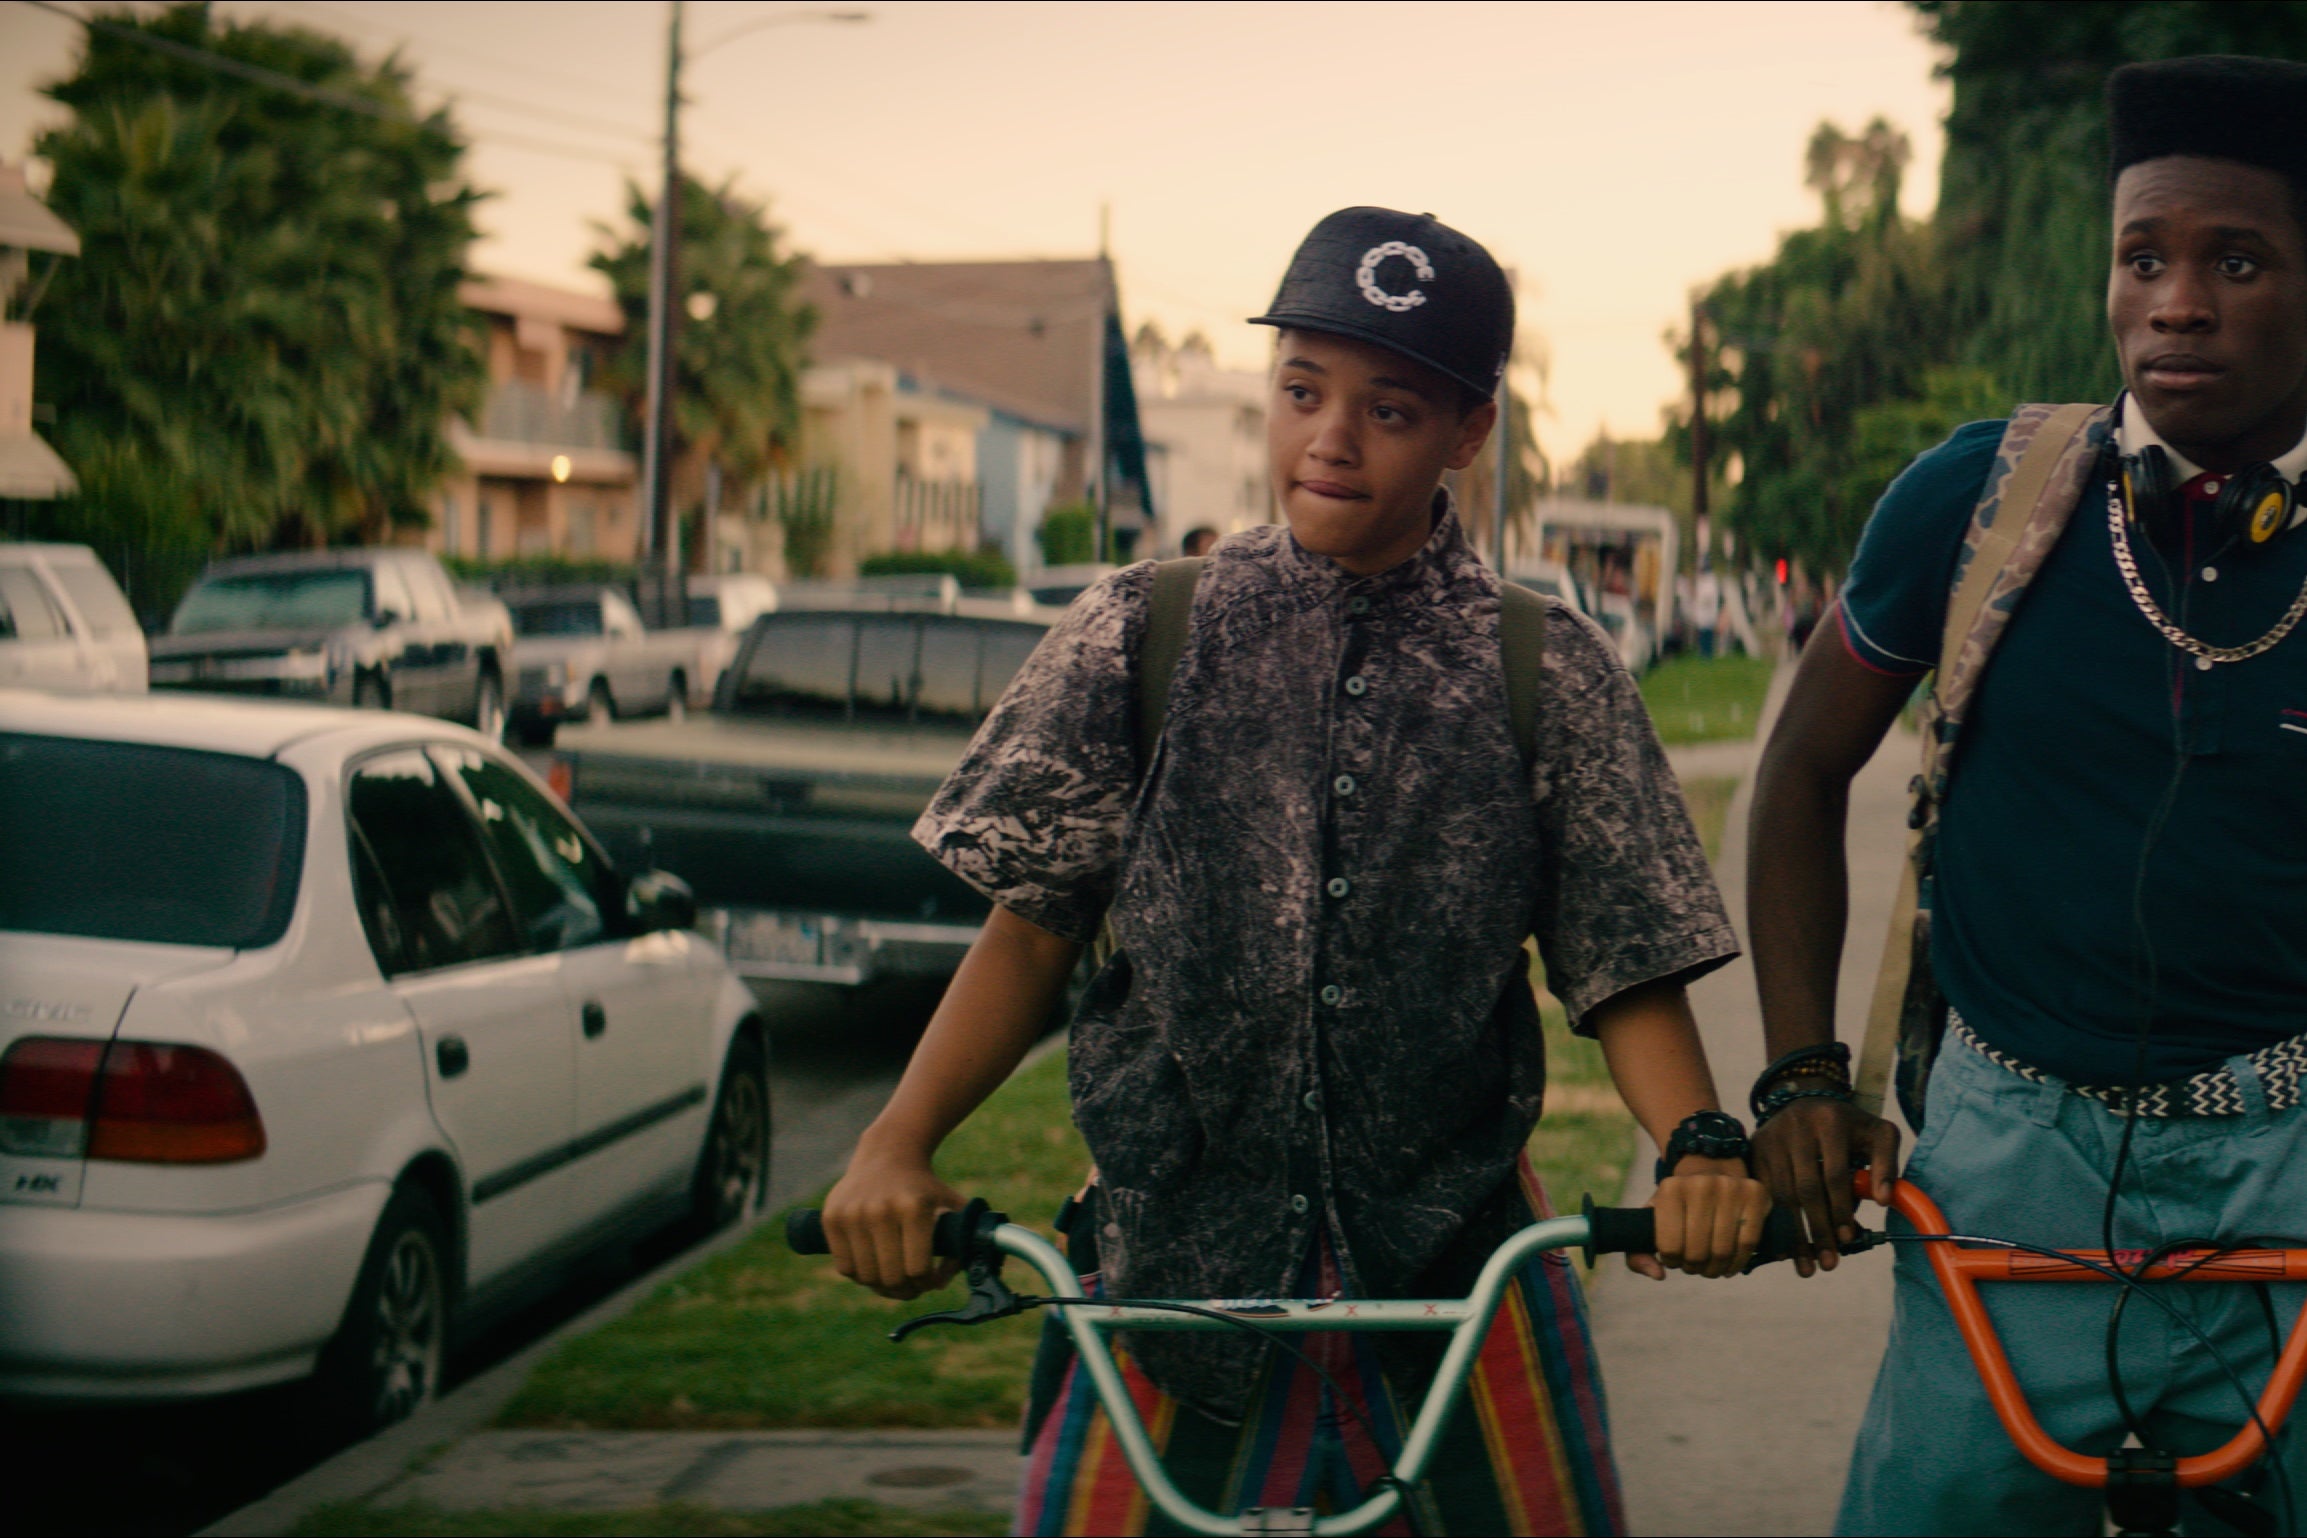 Three high-school aged kids dressed in 1990's hip-hop culture clothing, with backpacks on, pause during a neighborhood bike ride after school and stare at something off-screen. 